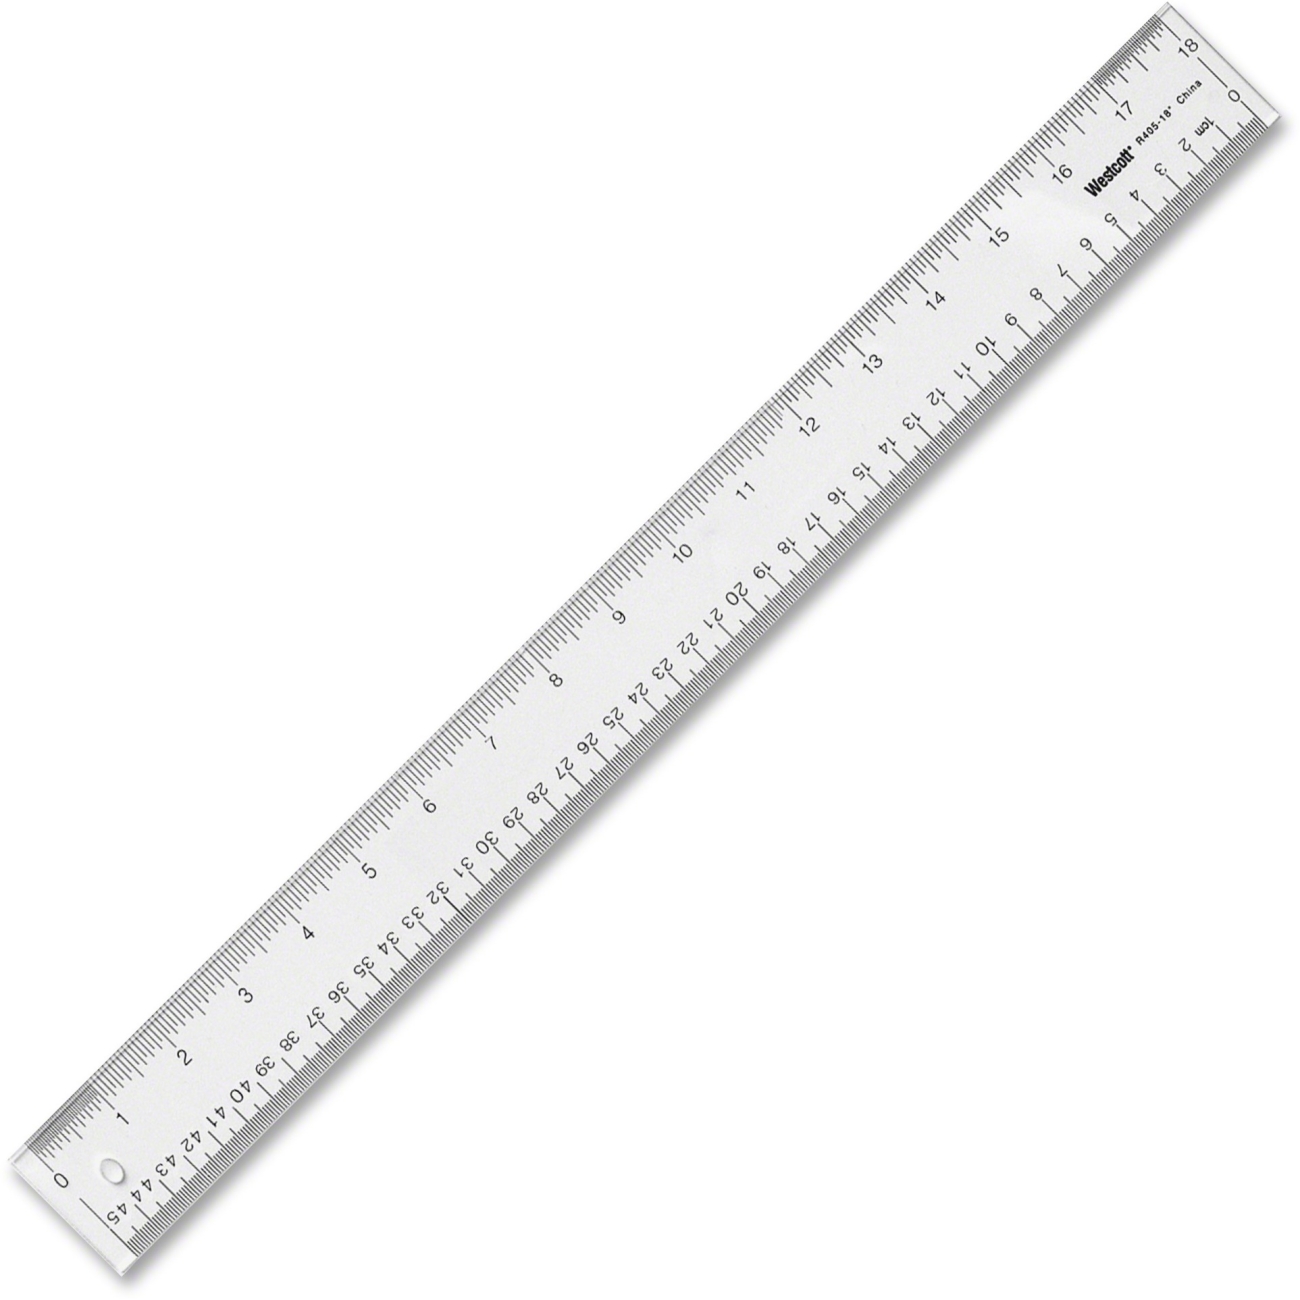 Ruler With Millimeters Printable